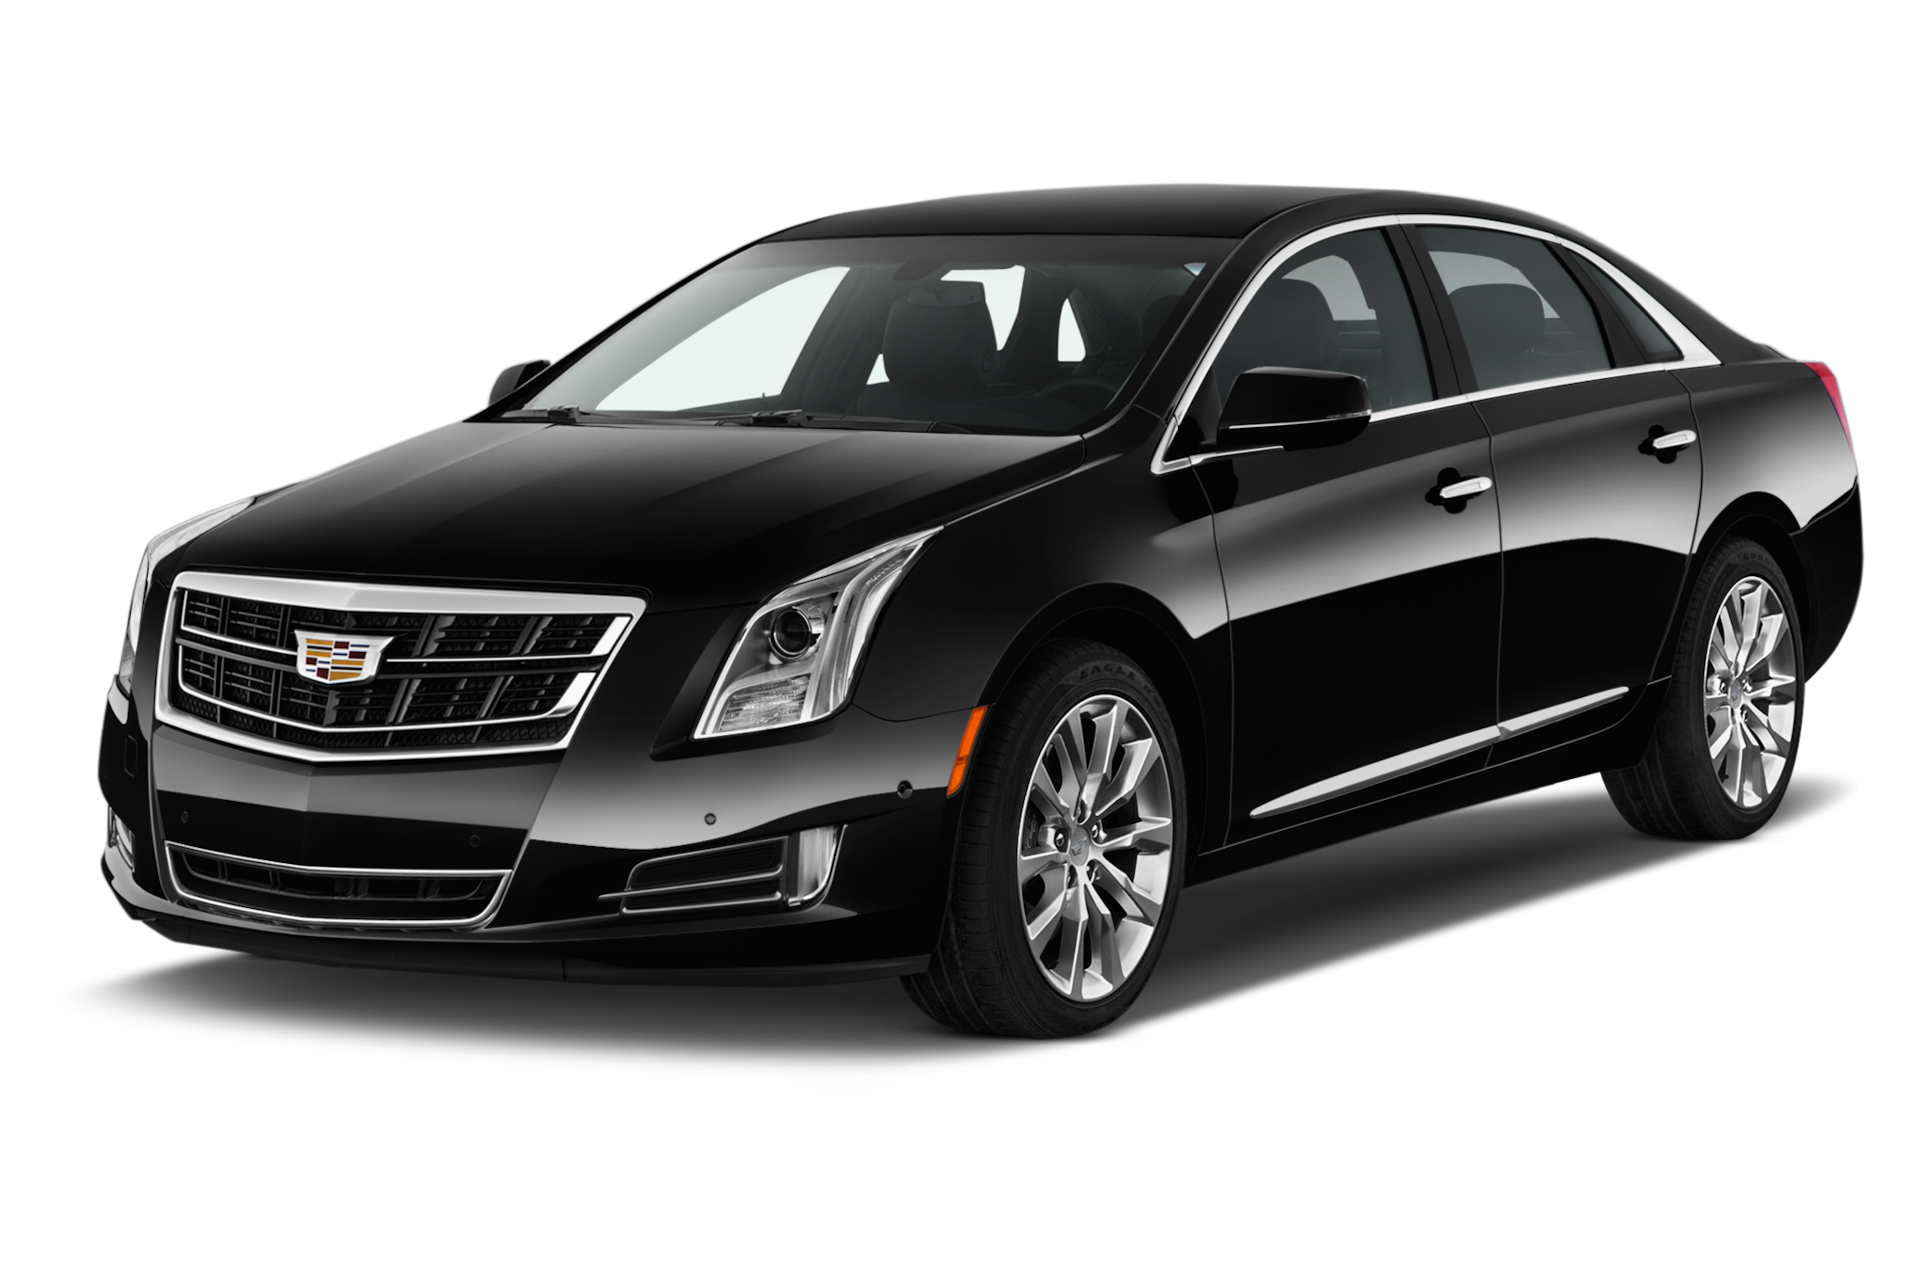 2016 Cadillac XTS Prices, Reviews, and Photos - MotorTrend